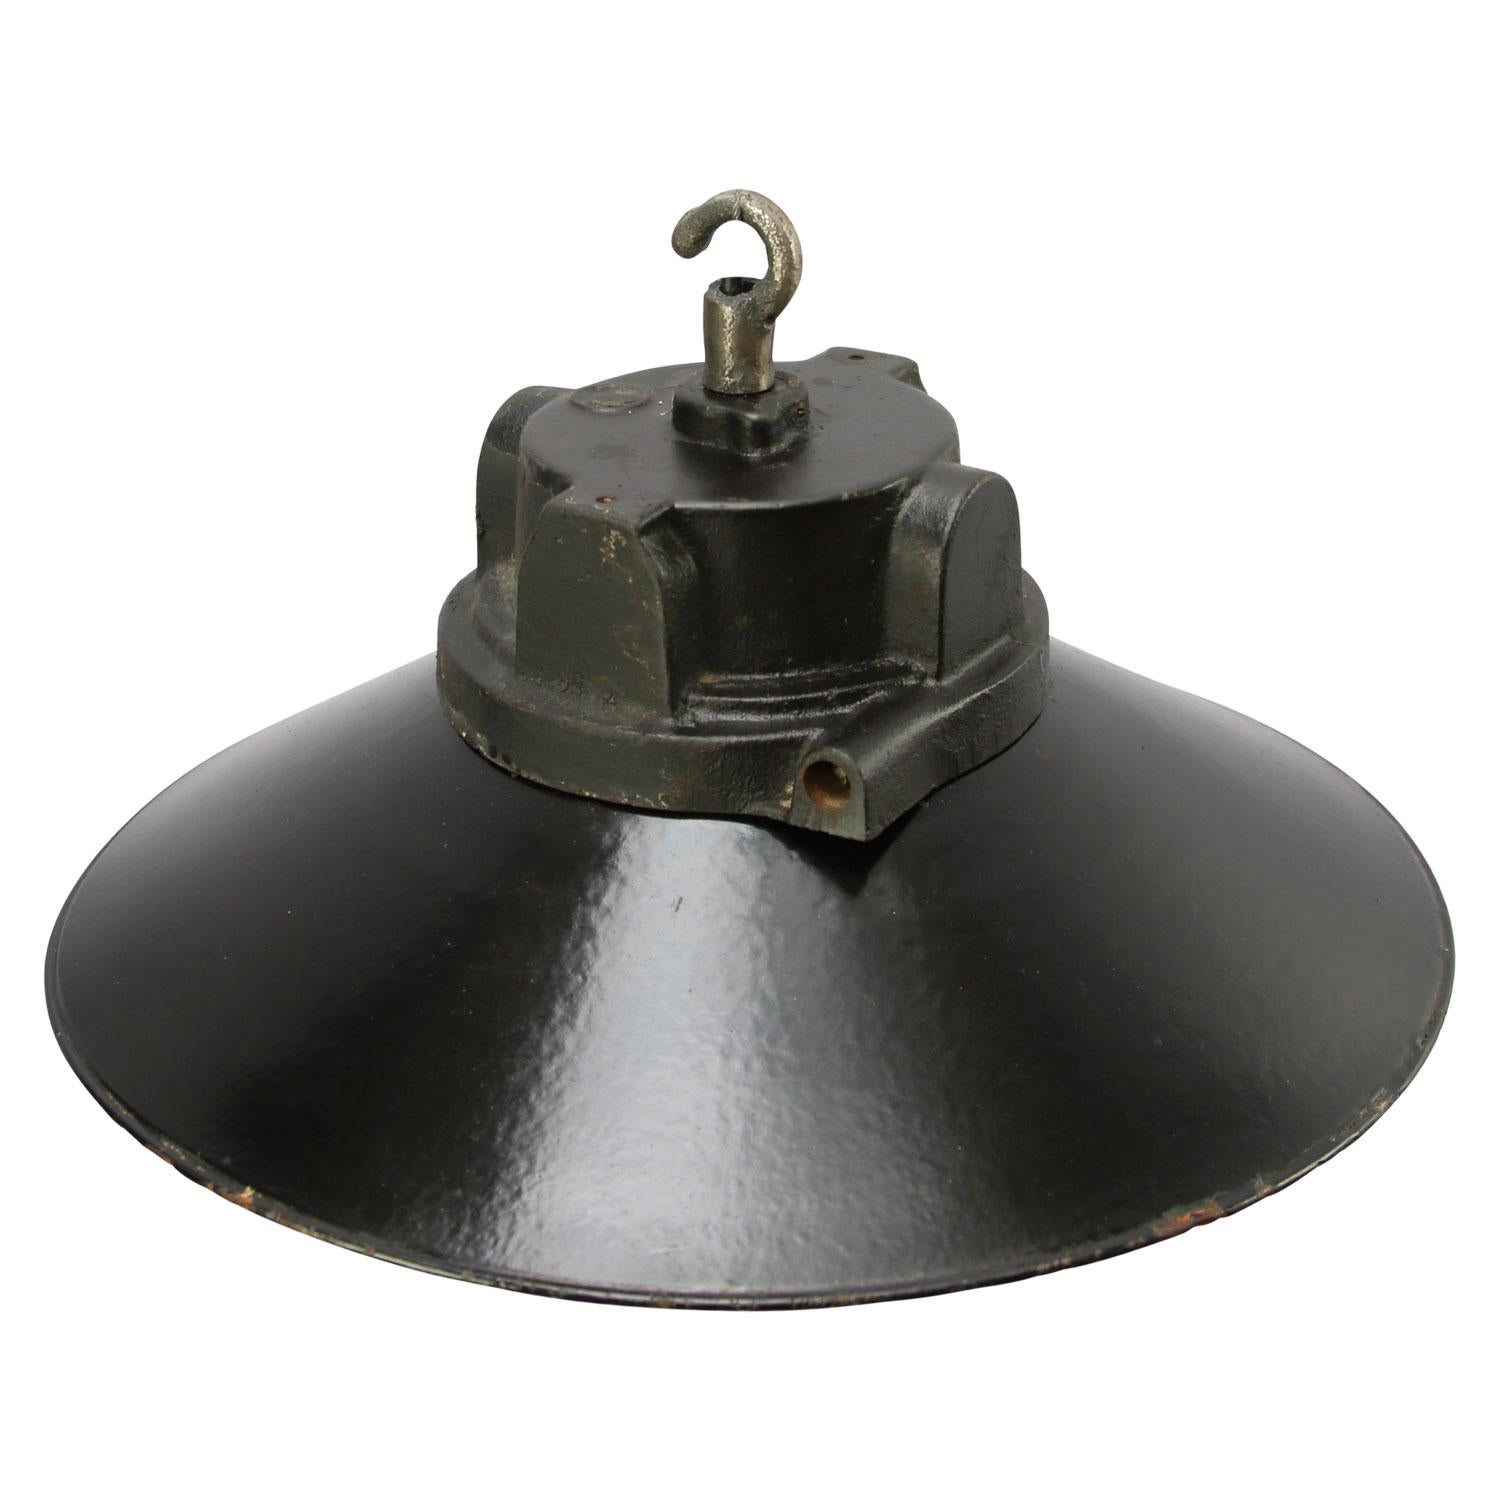 Original Siemens factory pendant
very rare early model
black enamel white interior
cast iron top with frosted glass and cage

Weight: 5.60 kg / 12.3 lb

Priced per individual item. All lamps have been made suitable by international standards